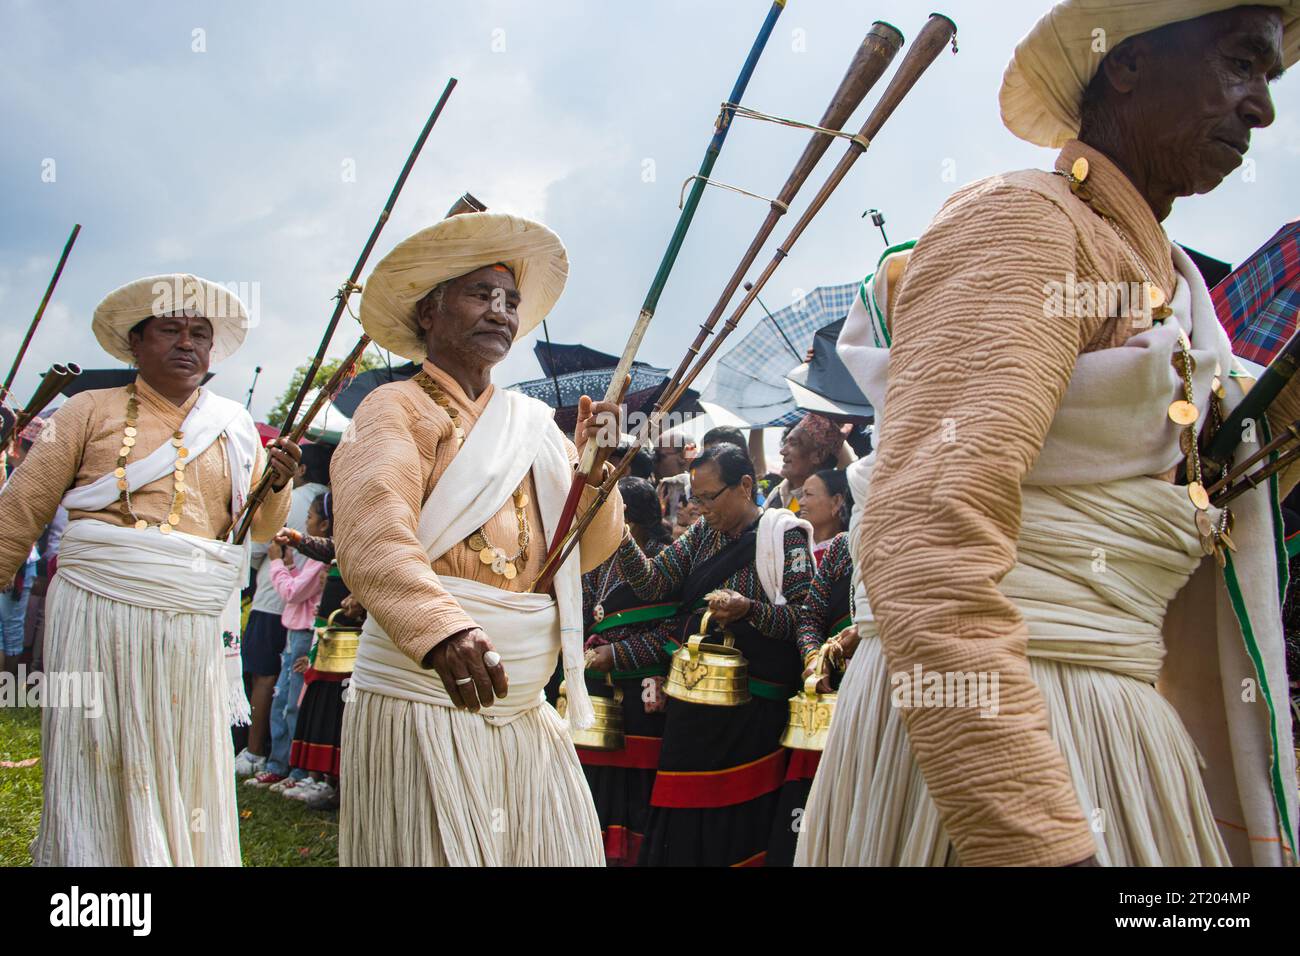 Musicians of Shikhali Jatra wear a saucer hat, beige top and white long skirt secured at the waist by a sash. They wear coin necklaces and play Ponga Stock Photo